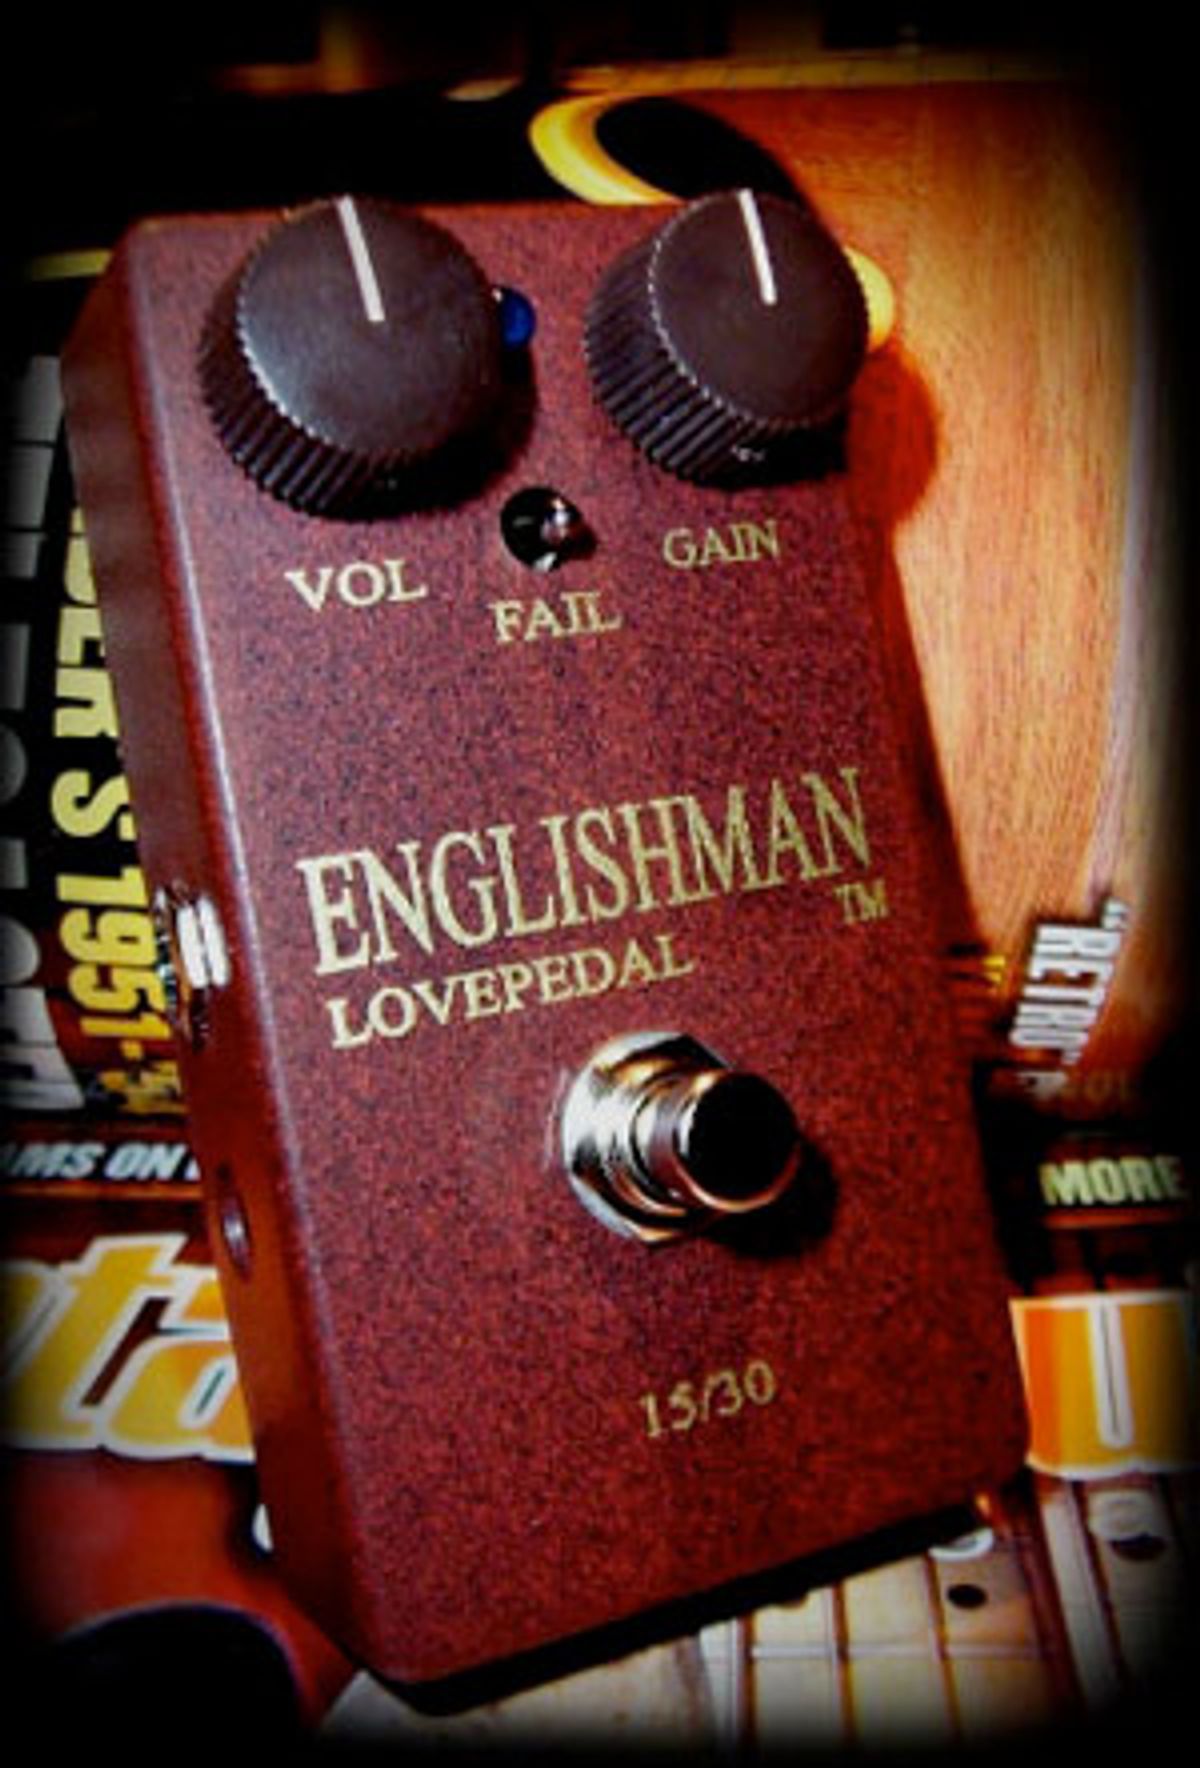 Lovepedal Releases Englishman